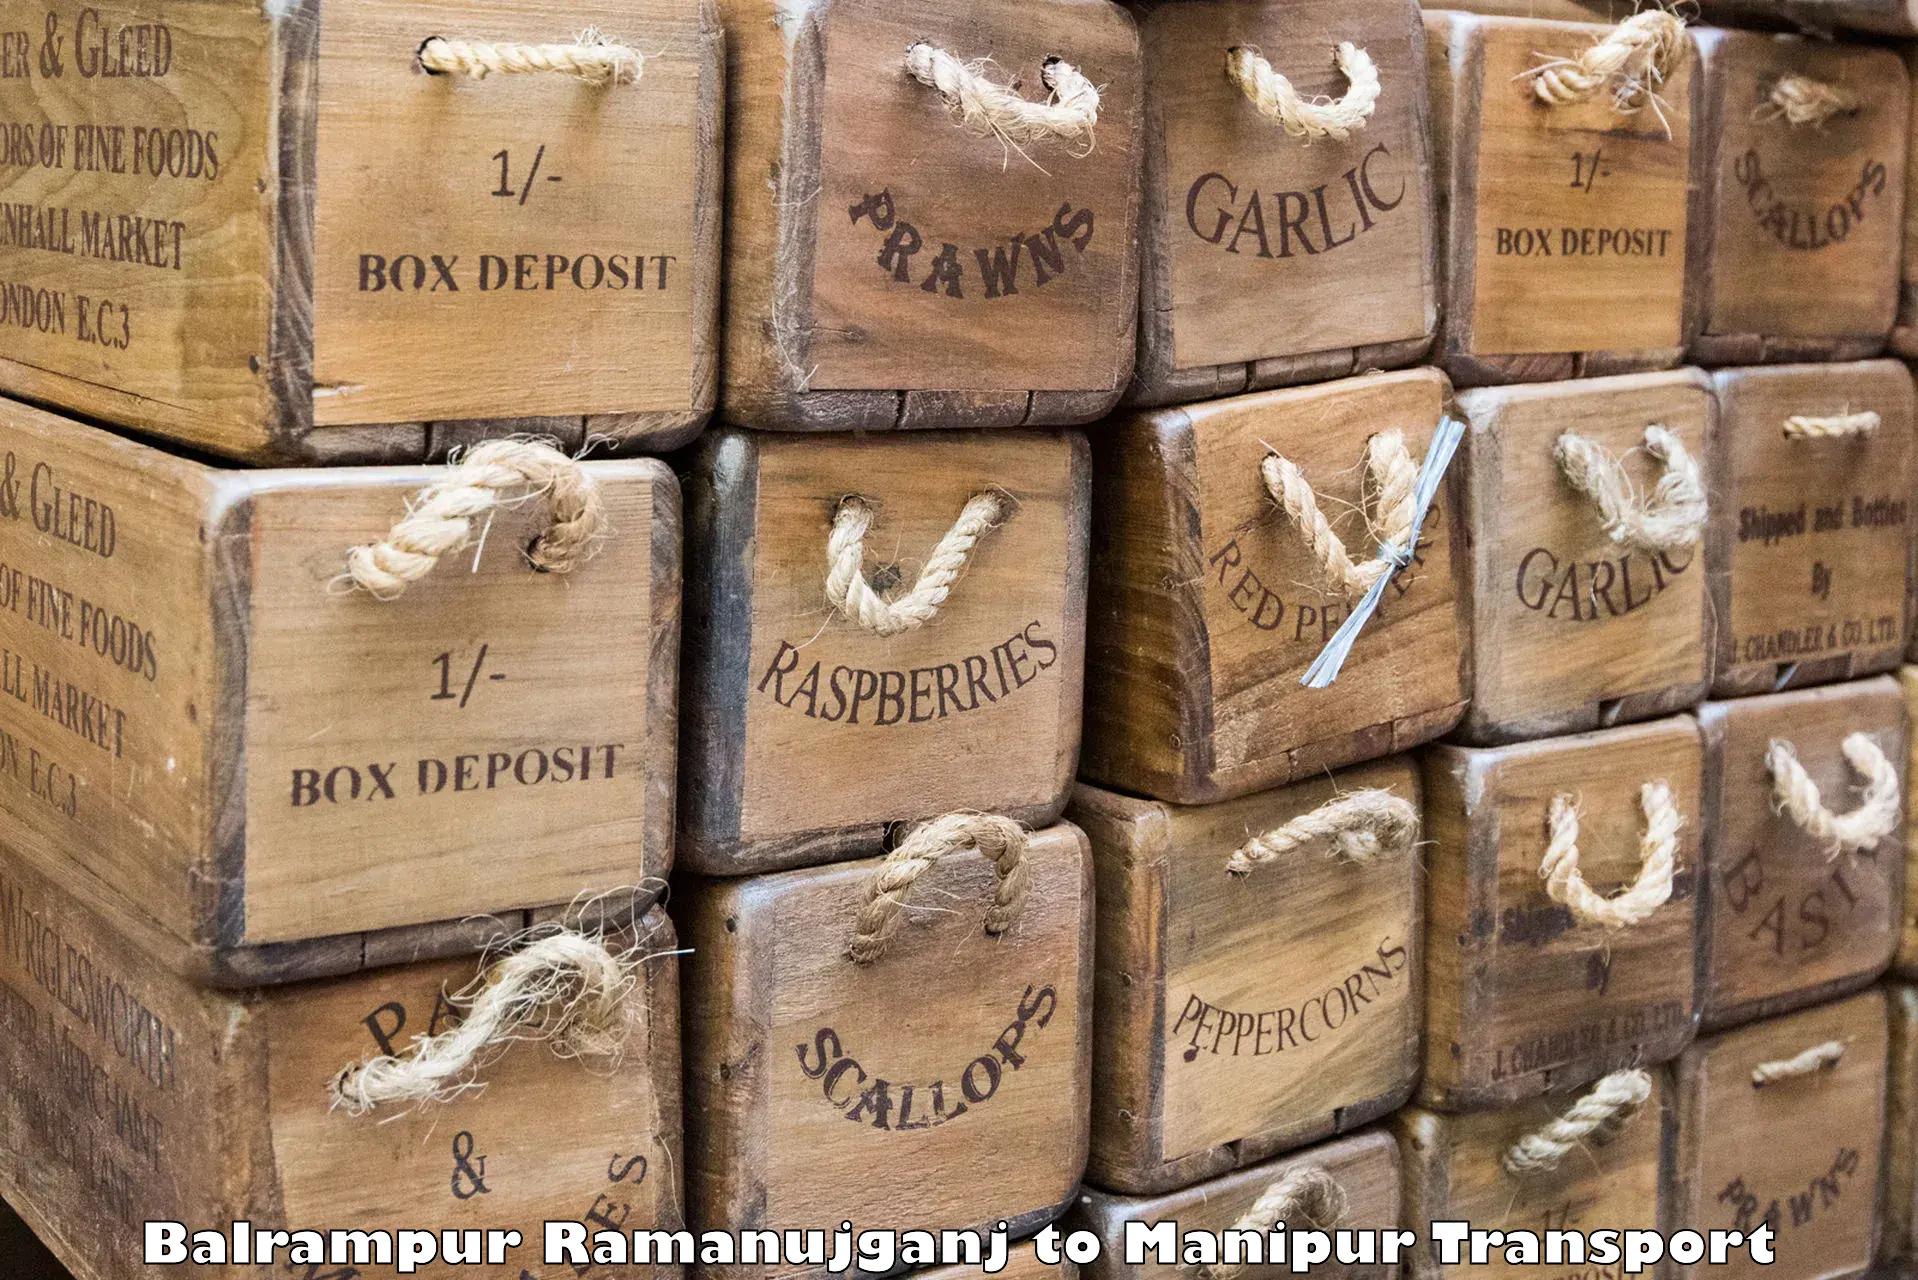 Air freight transport services Balrampur Ramanujganj to Chandel